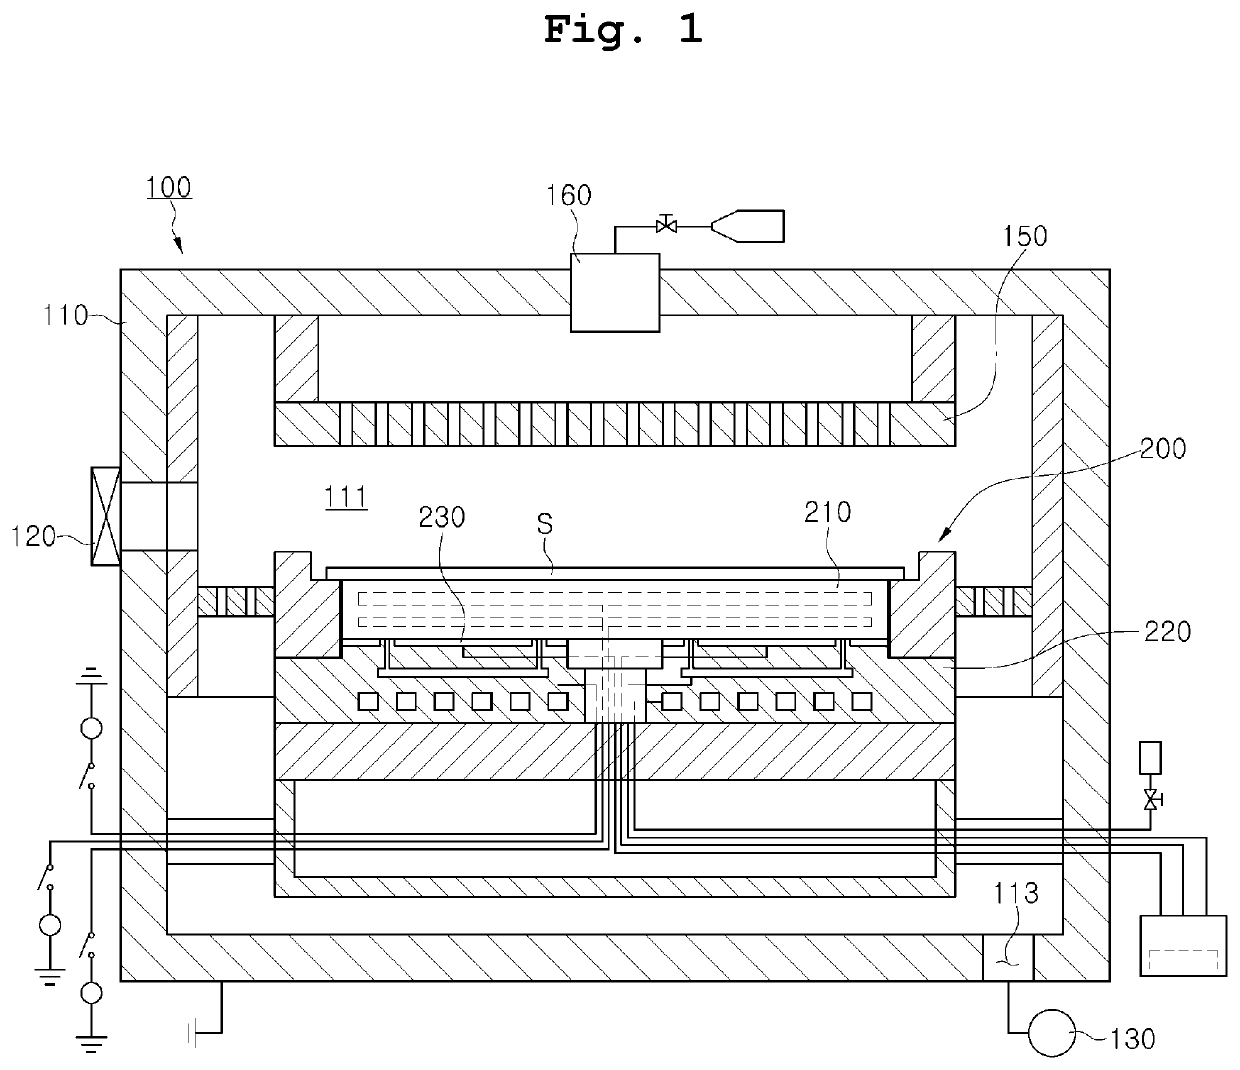 Substrate processing apparatus and method of fabricating same